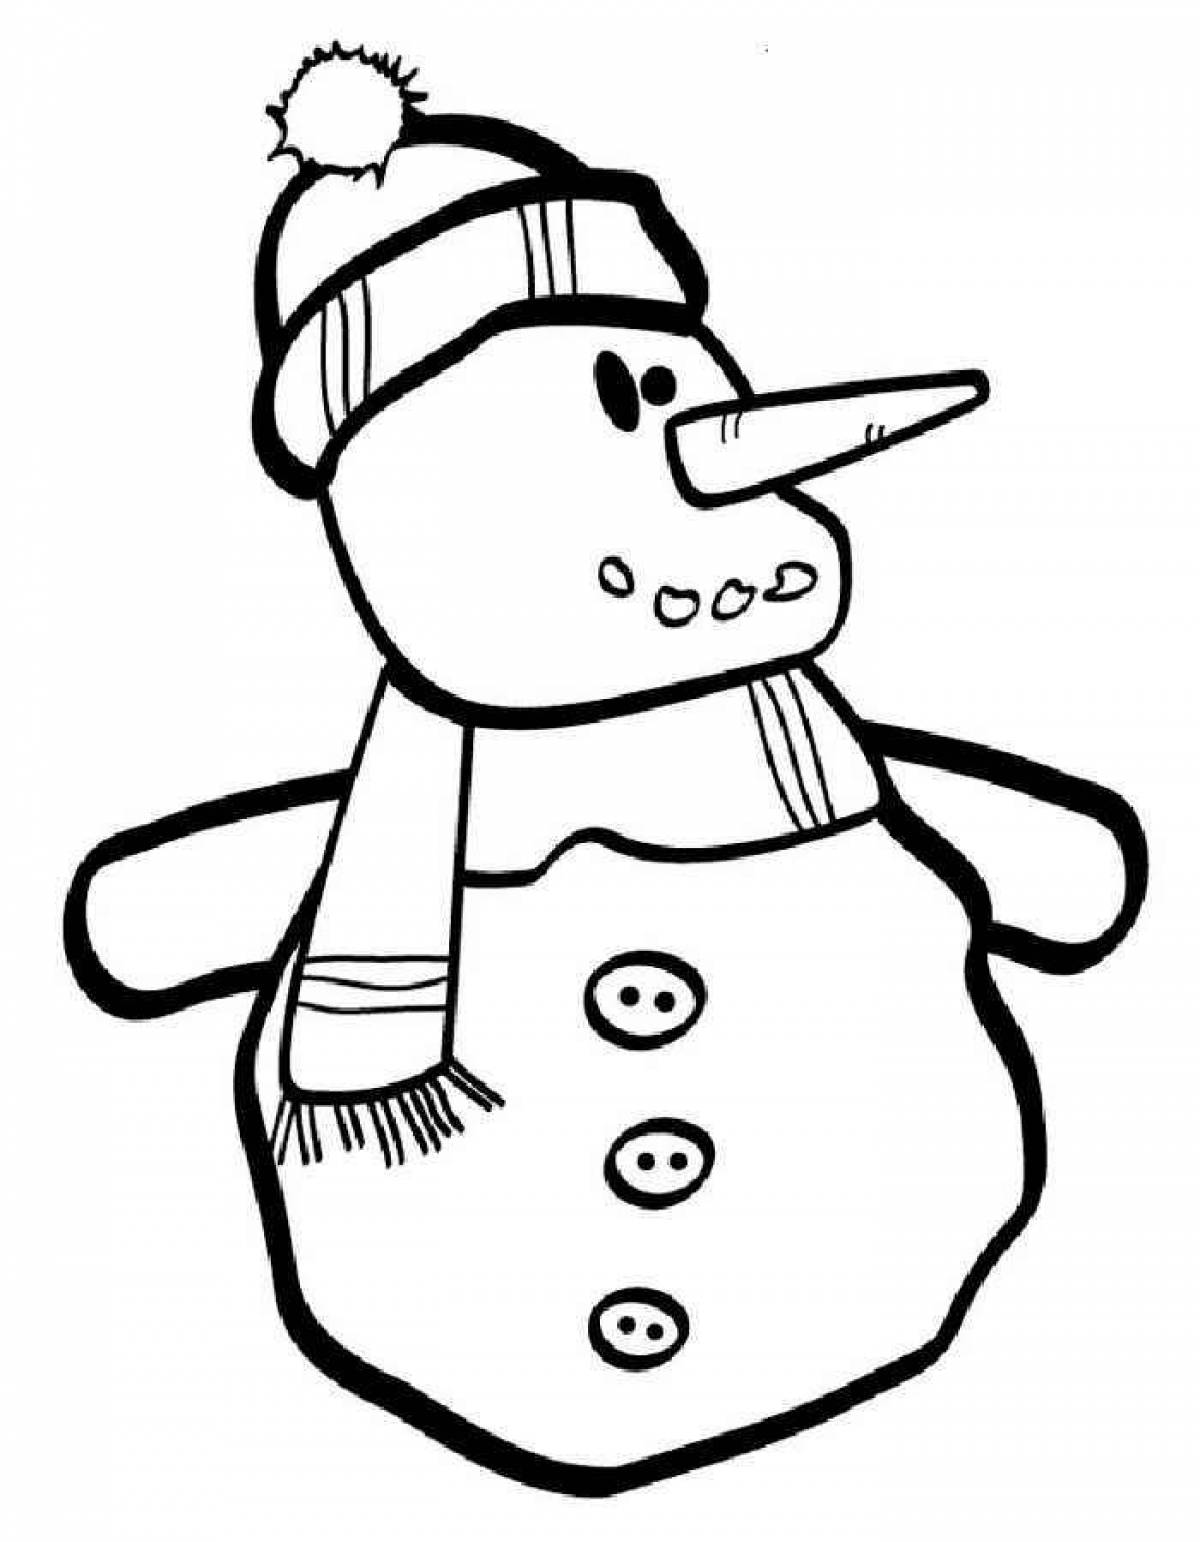 A fun snowman coloring book for kids